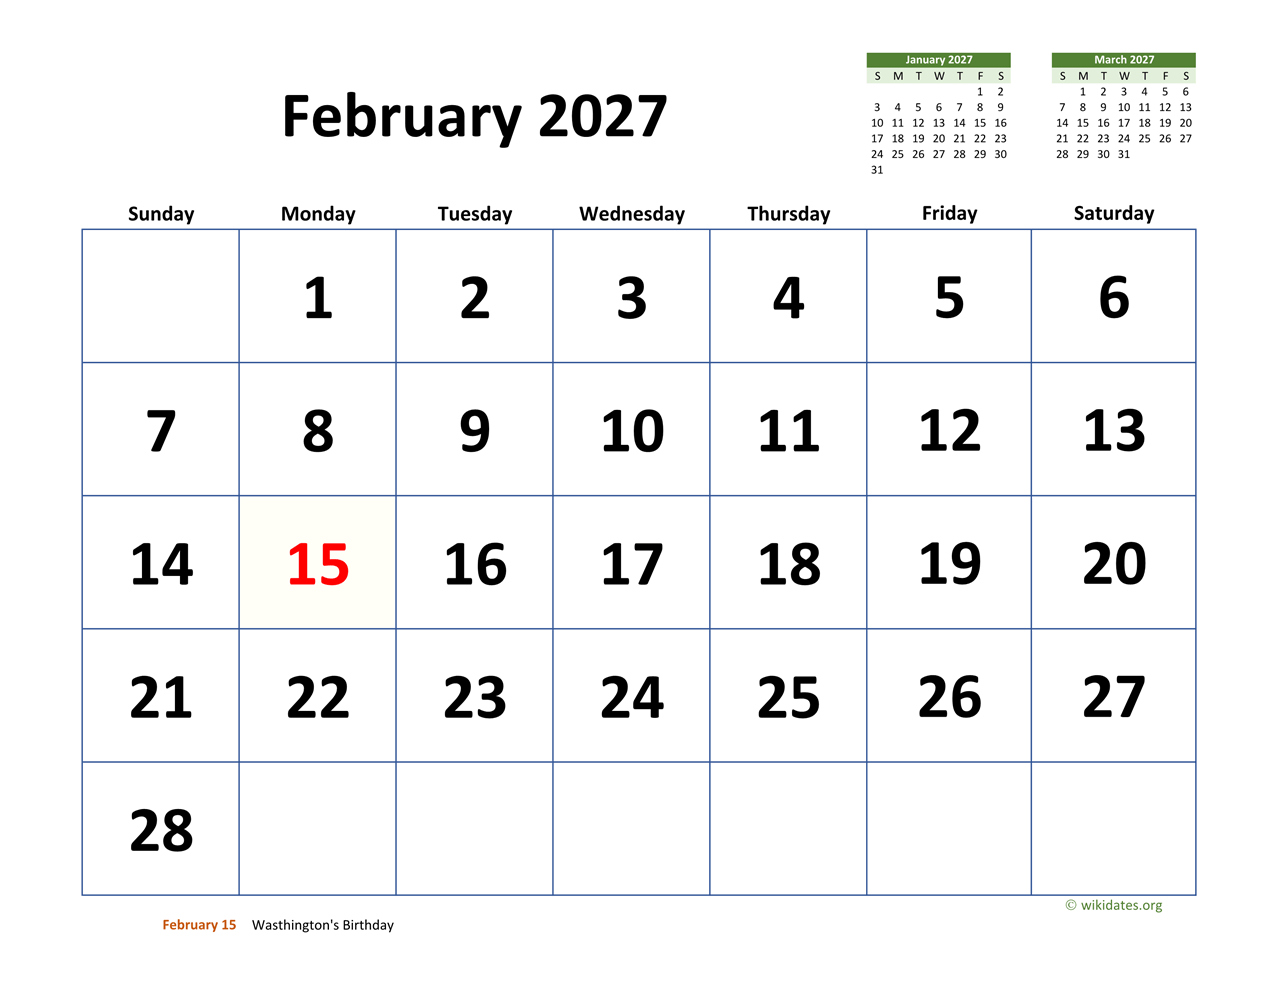 February 2027 Calendar with Extralarge Dates